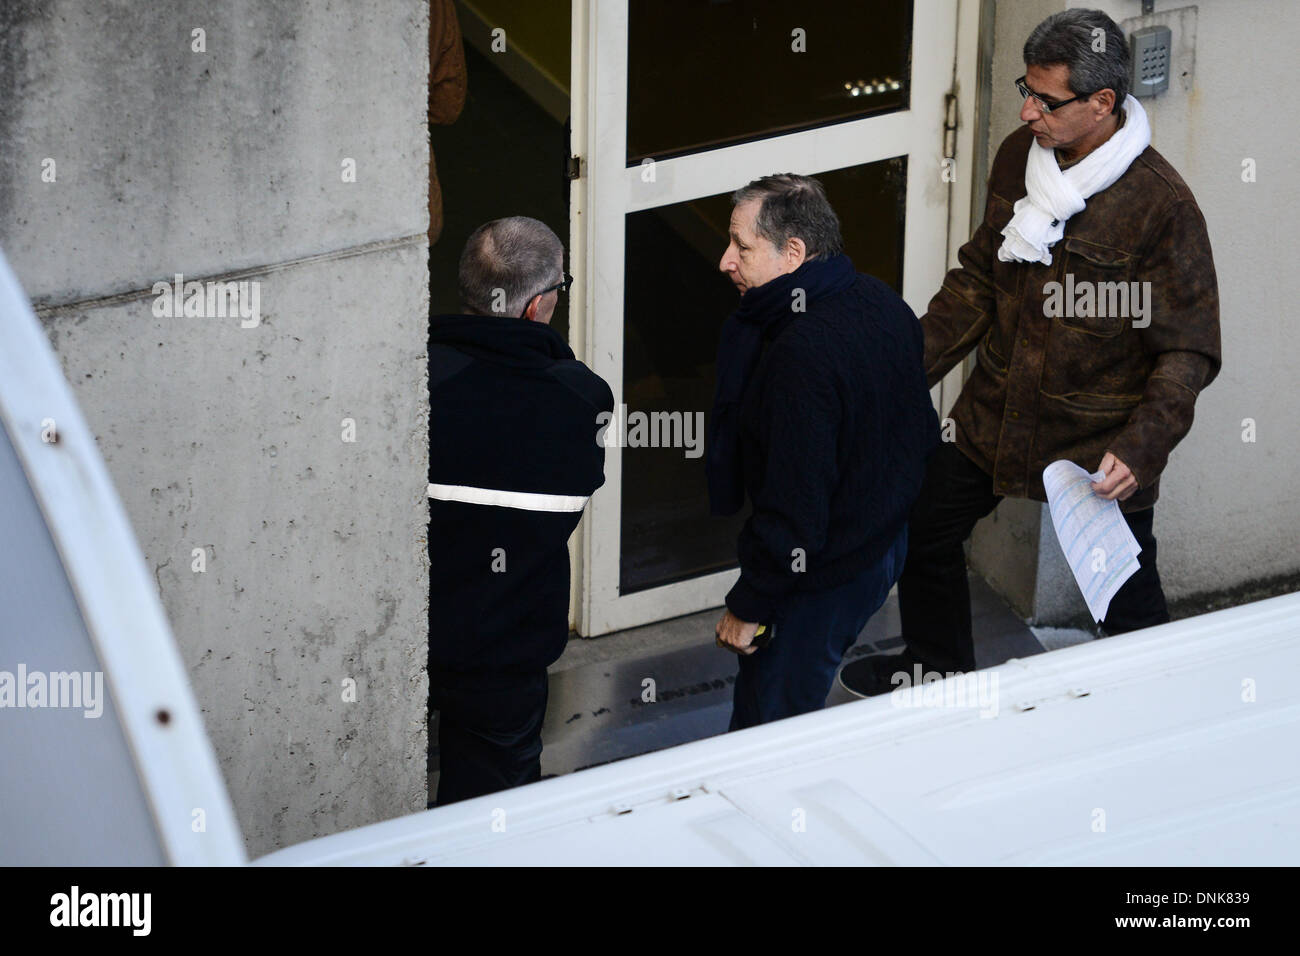 Grenoble, France. 01st Jan, 2014. President of the Federation Internationale de l'Automobile (F.I.A.) Jean Todt (C) arrives at the 'Centre Hospitalier Universitaire' (CHU) hospital in Grenoble, France, 01 January 2014. Schumacher manager Kehm says Schumacher' s condition is stable and has not changed since doctors said he showed small signs of improvement. Schumacher, who turns 45 on Friday, suffered critical head injuries when he fell and struck a rock Sunday while skiing. Photo: David Ebener/dpa/Alamy Live News Stock Photo